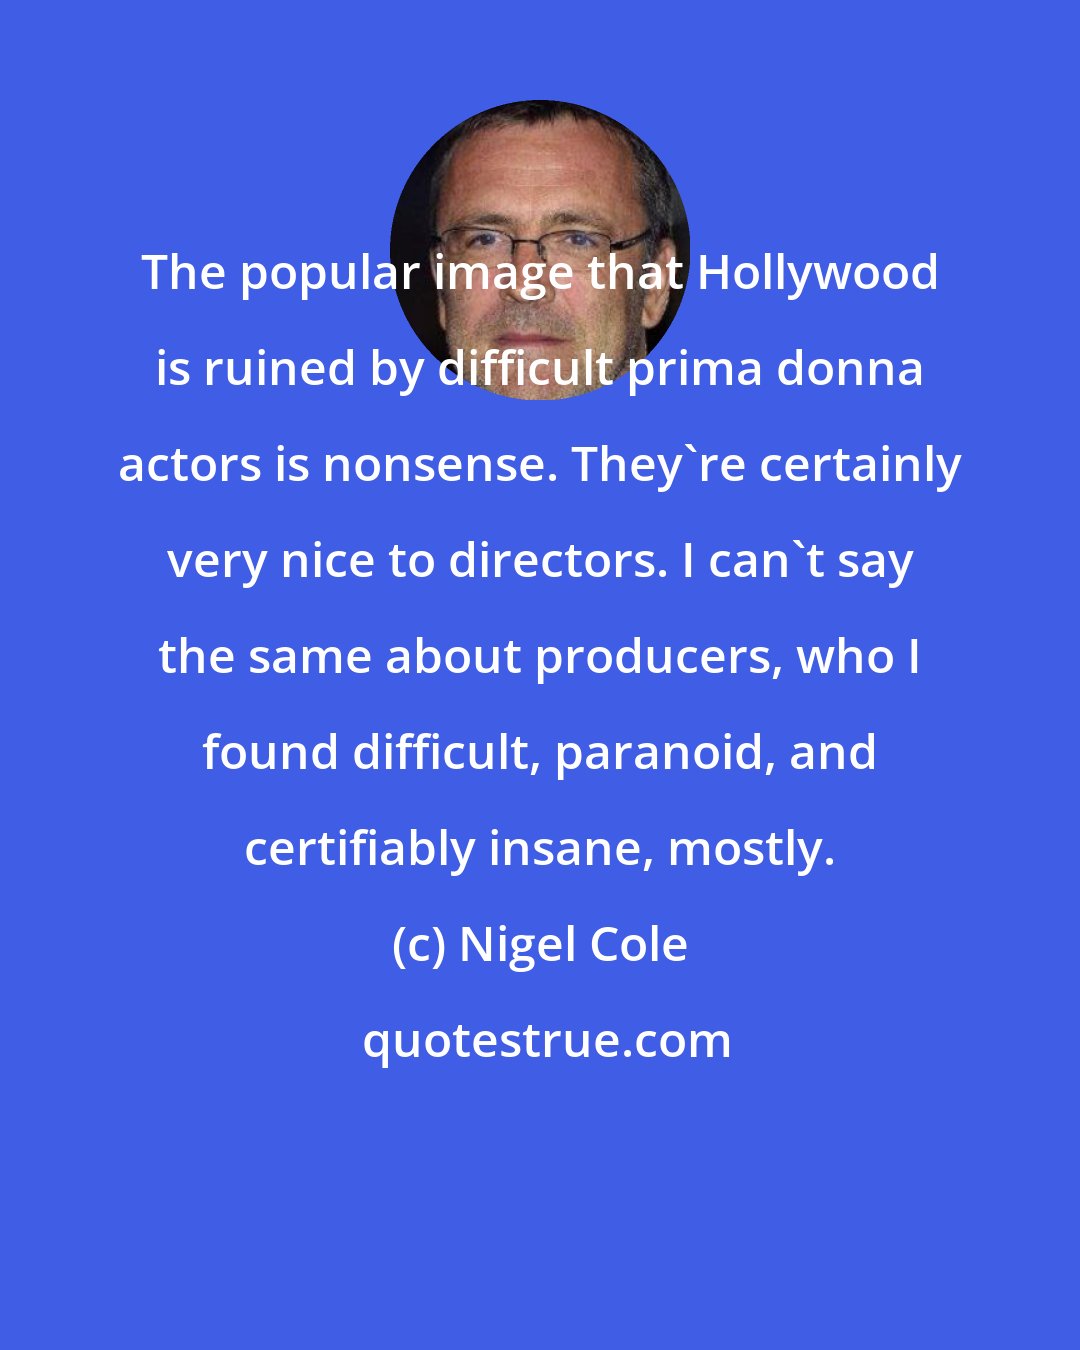 Nigel Cole: The popular image that Hollywood is ruined by difficult prima donna actors is nonsense. They're certainly very nice to directors. I can't say the same about producers, who I found difficult, paranoid, and certifiably insane, mostly.